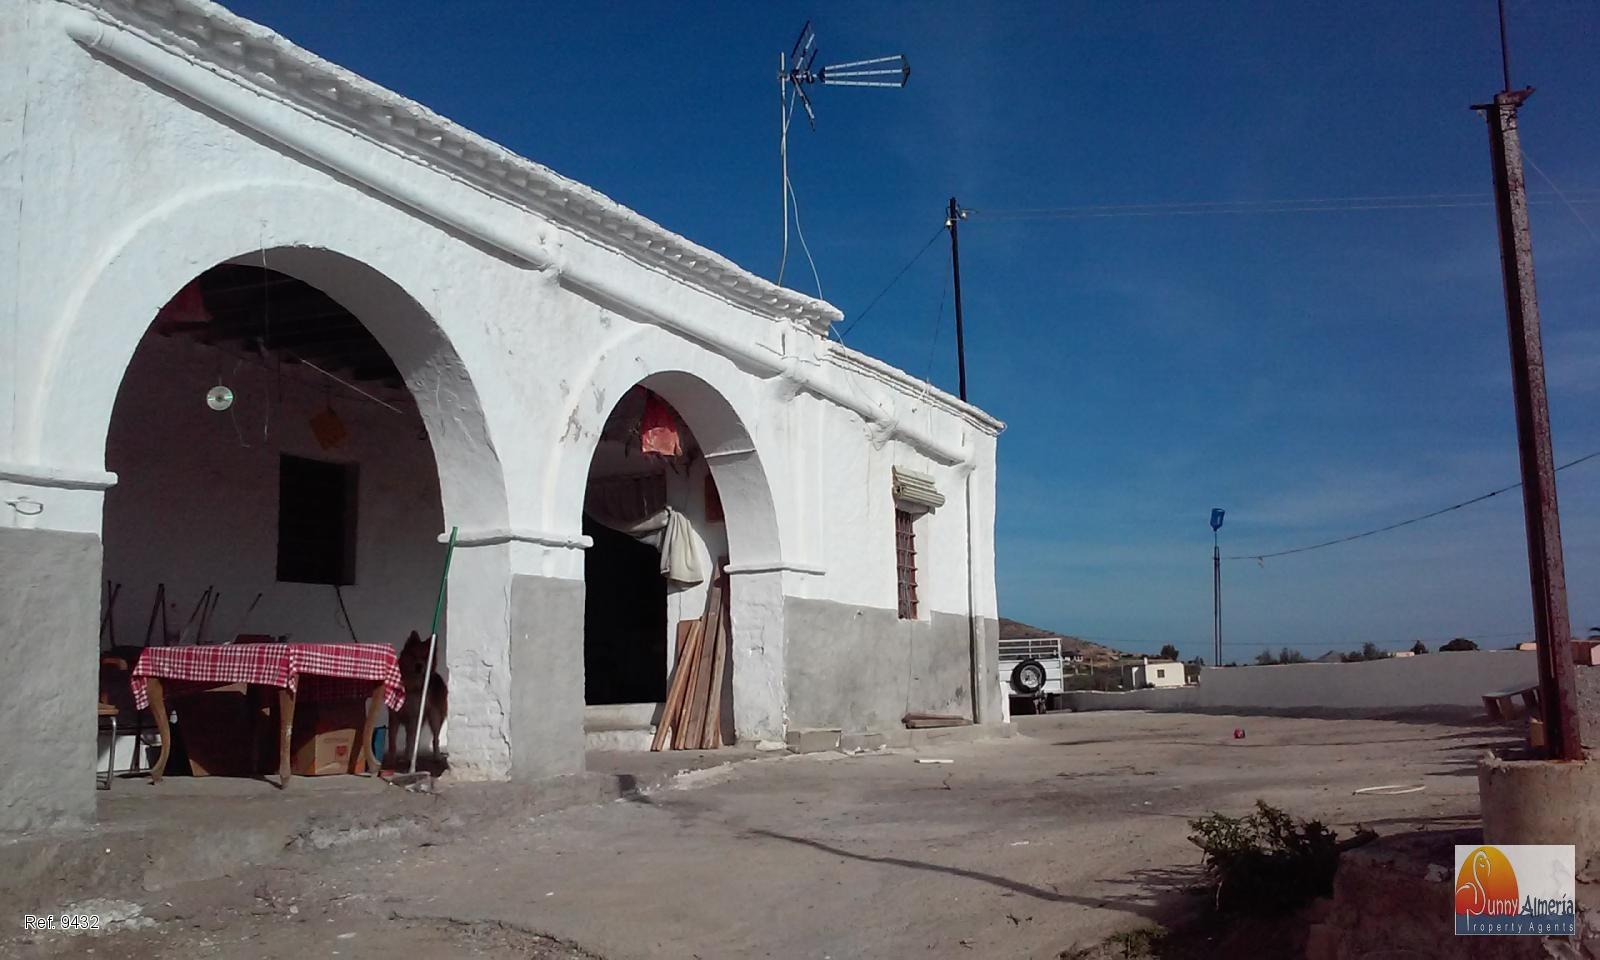 Country Properties for sale in Tabernas, 82.000 €